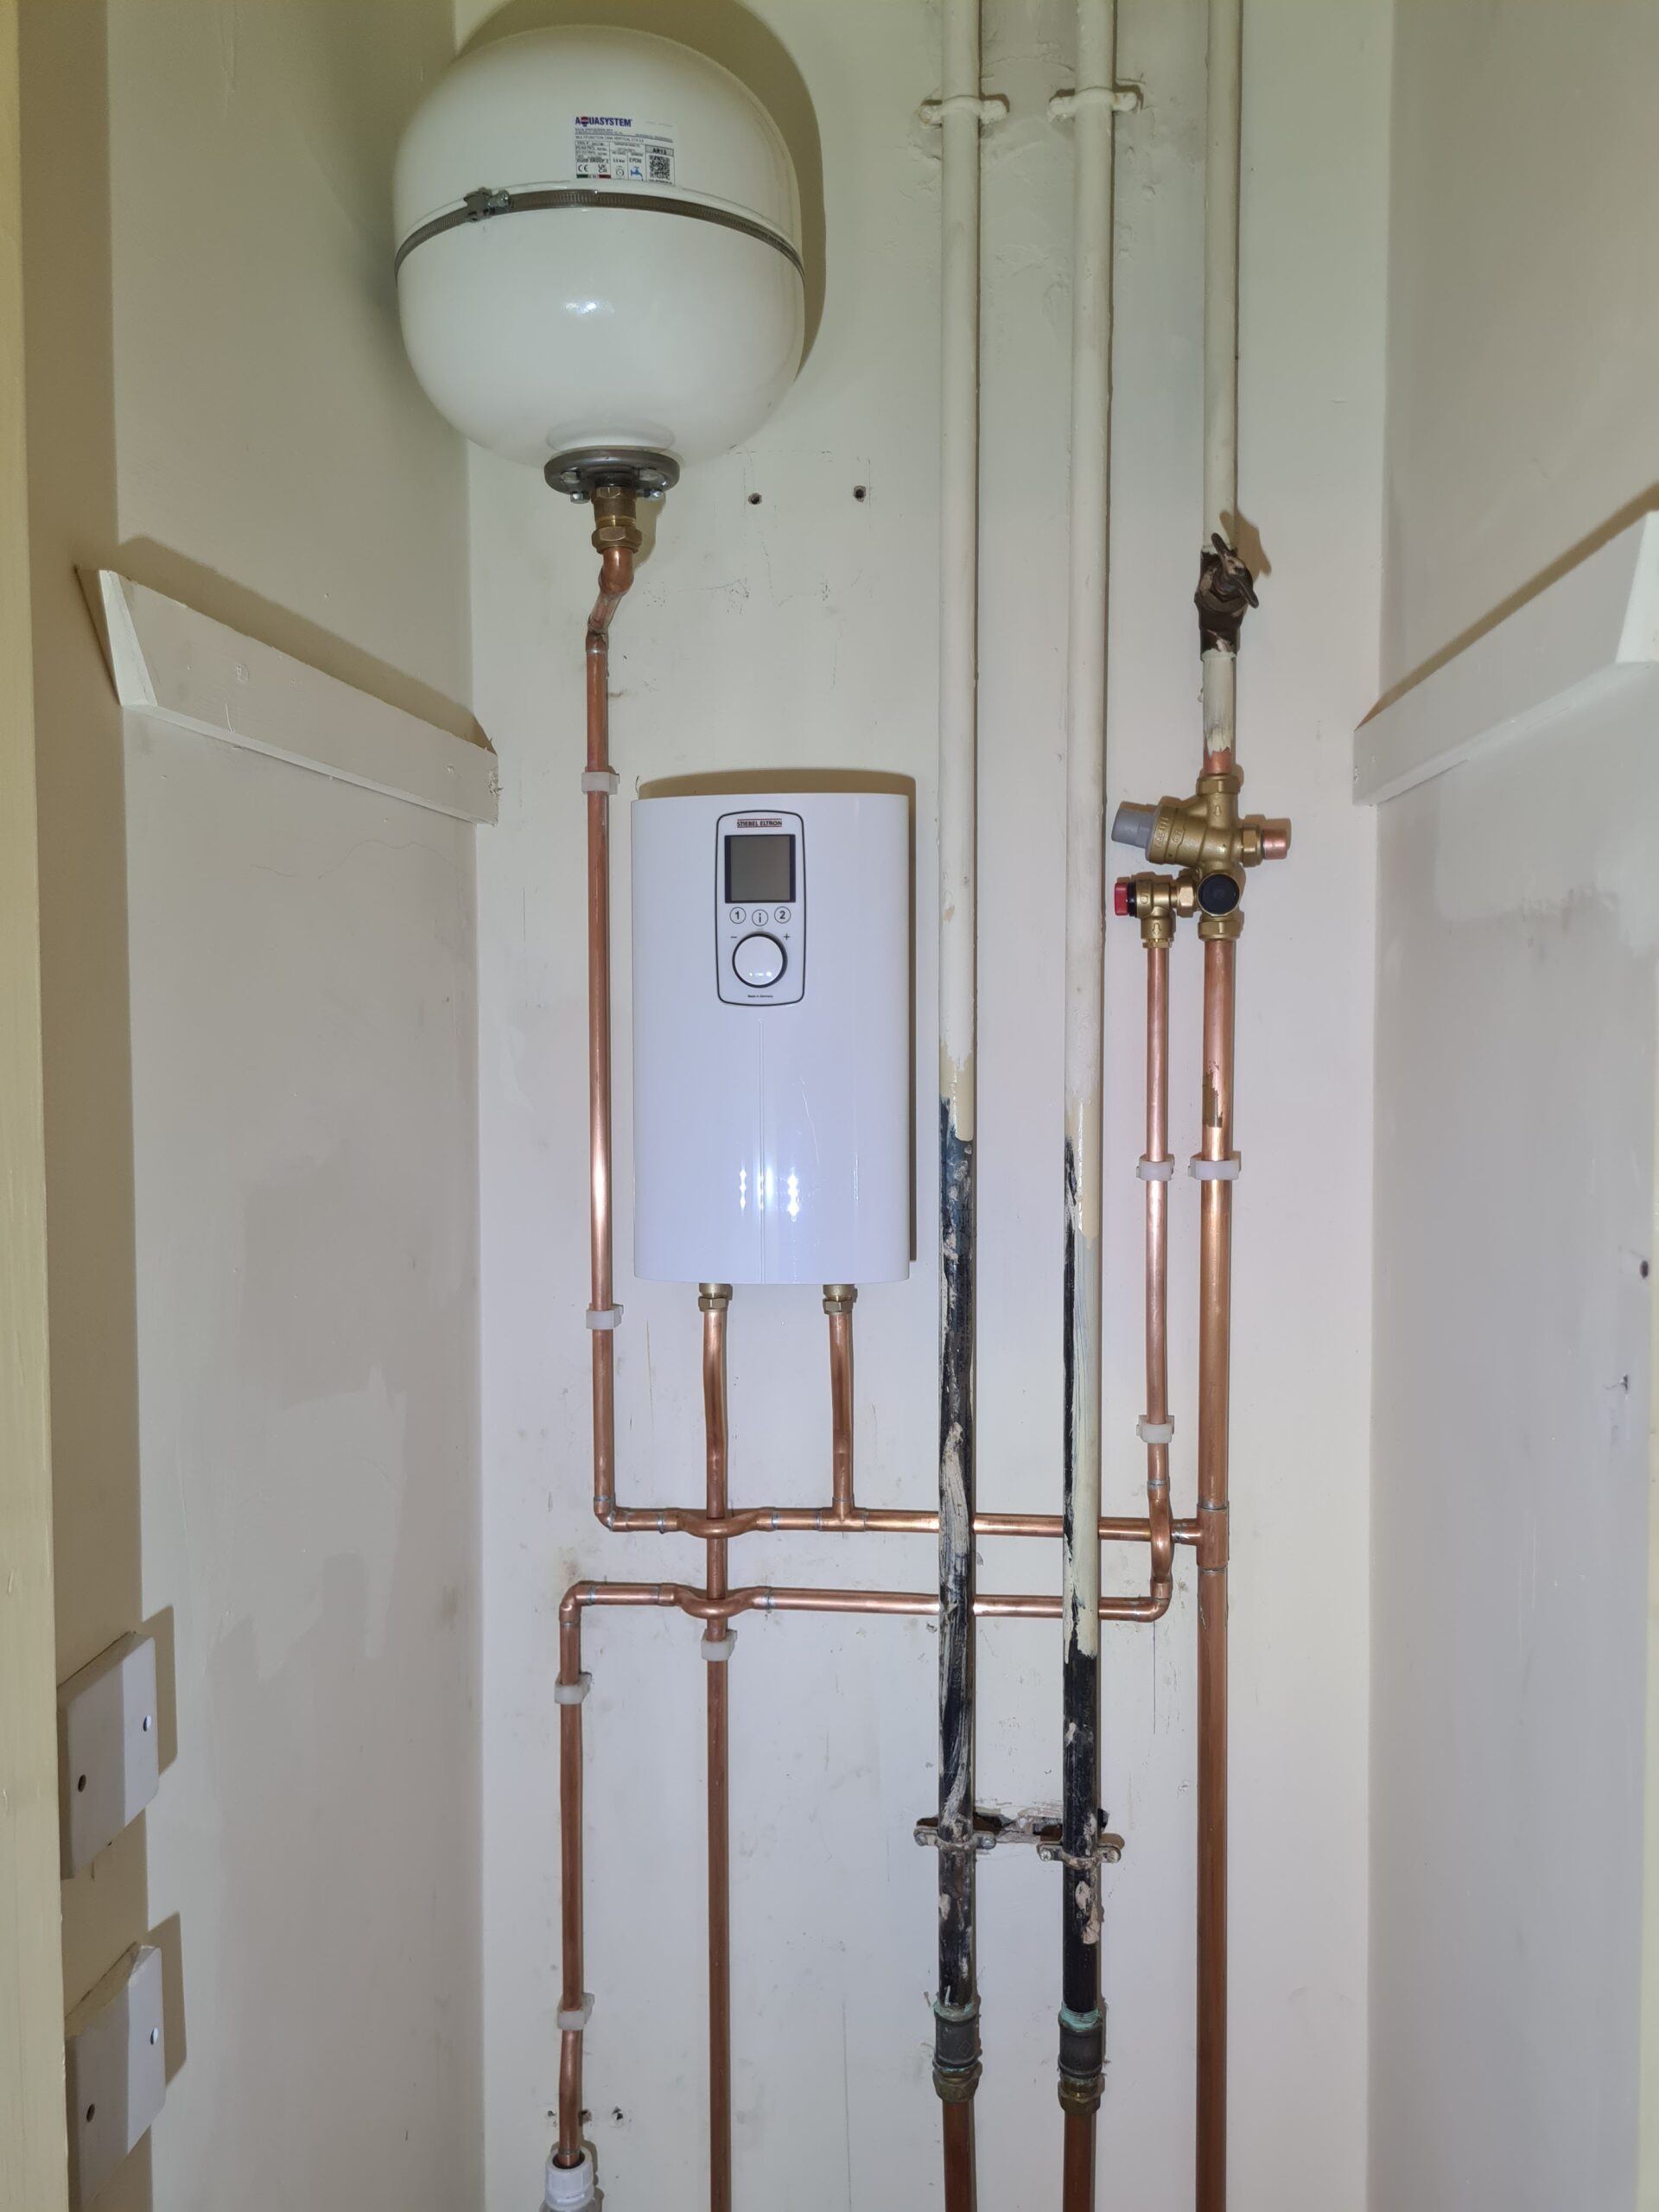 Electric-boiler-installation-water-heater-in-Stoke-on-Trent-and-expansion-vessel